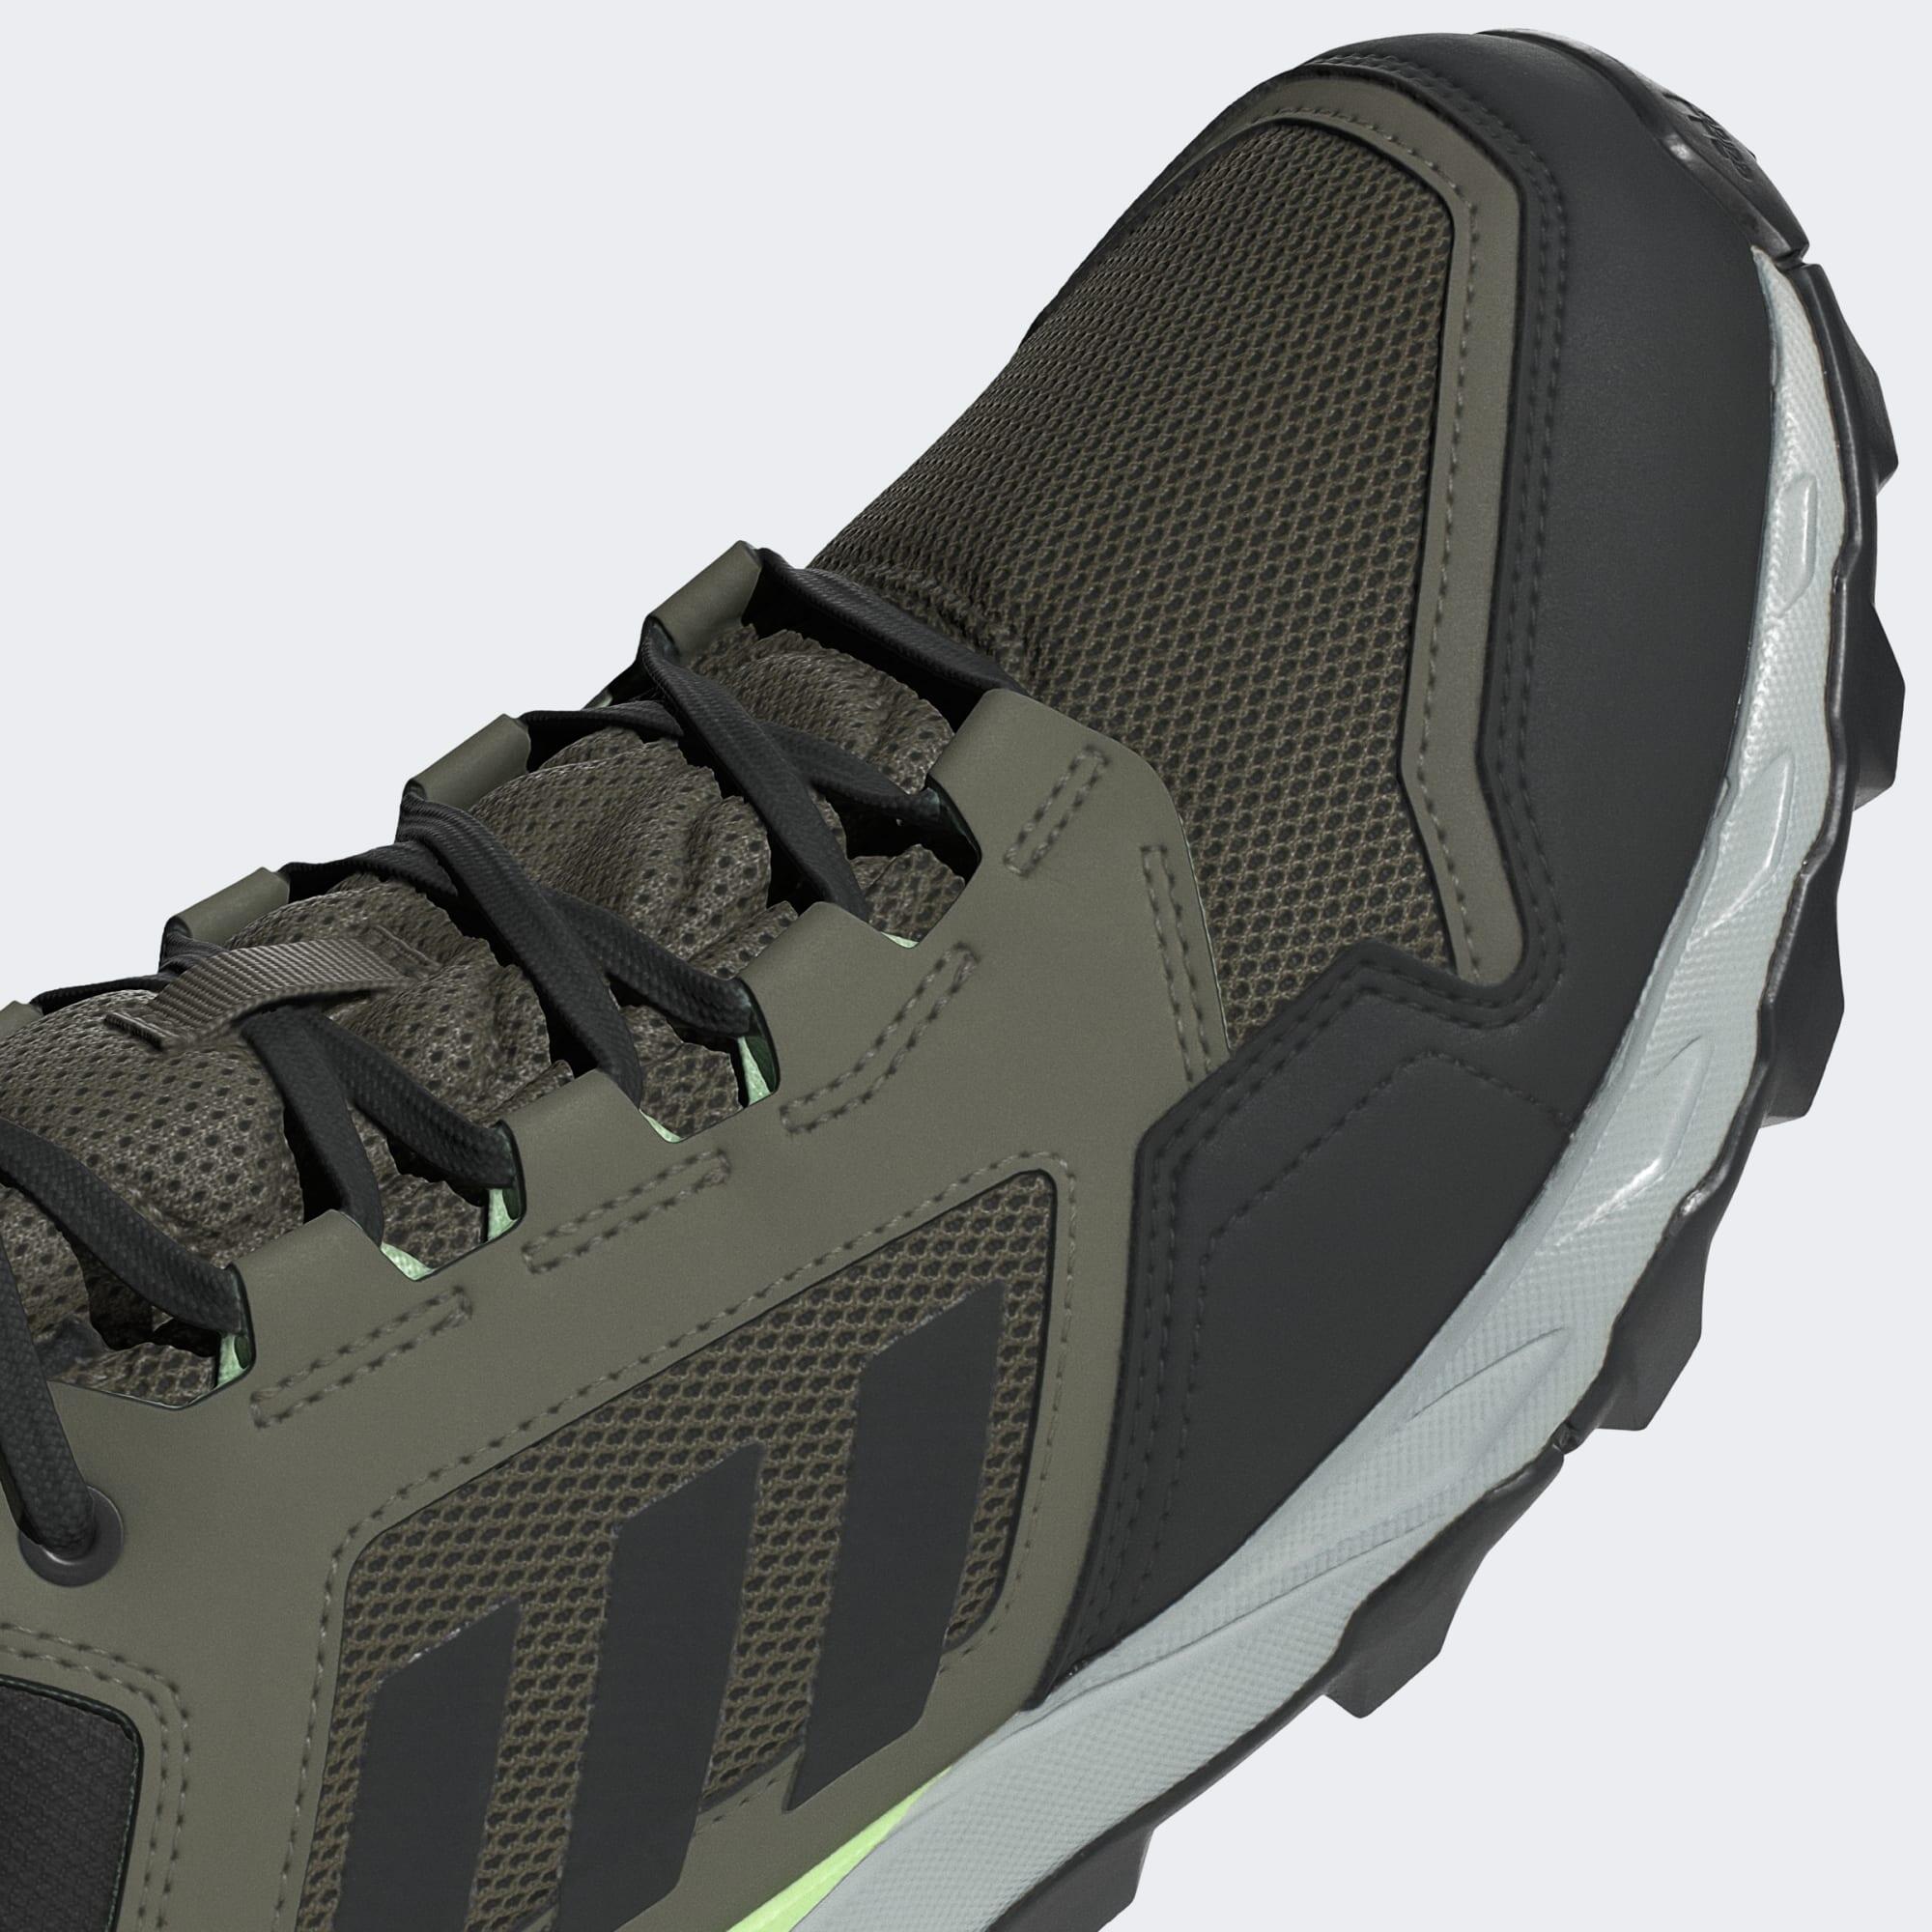 Tracerocker 2.0 GORE-TEX Trail Running Shoes 6/7